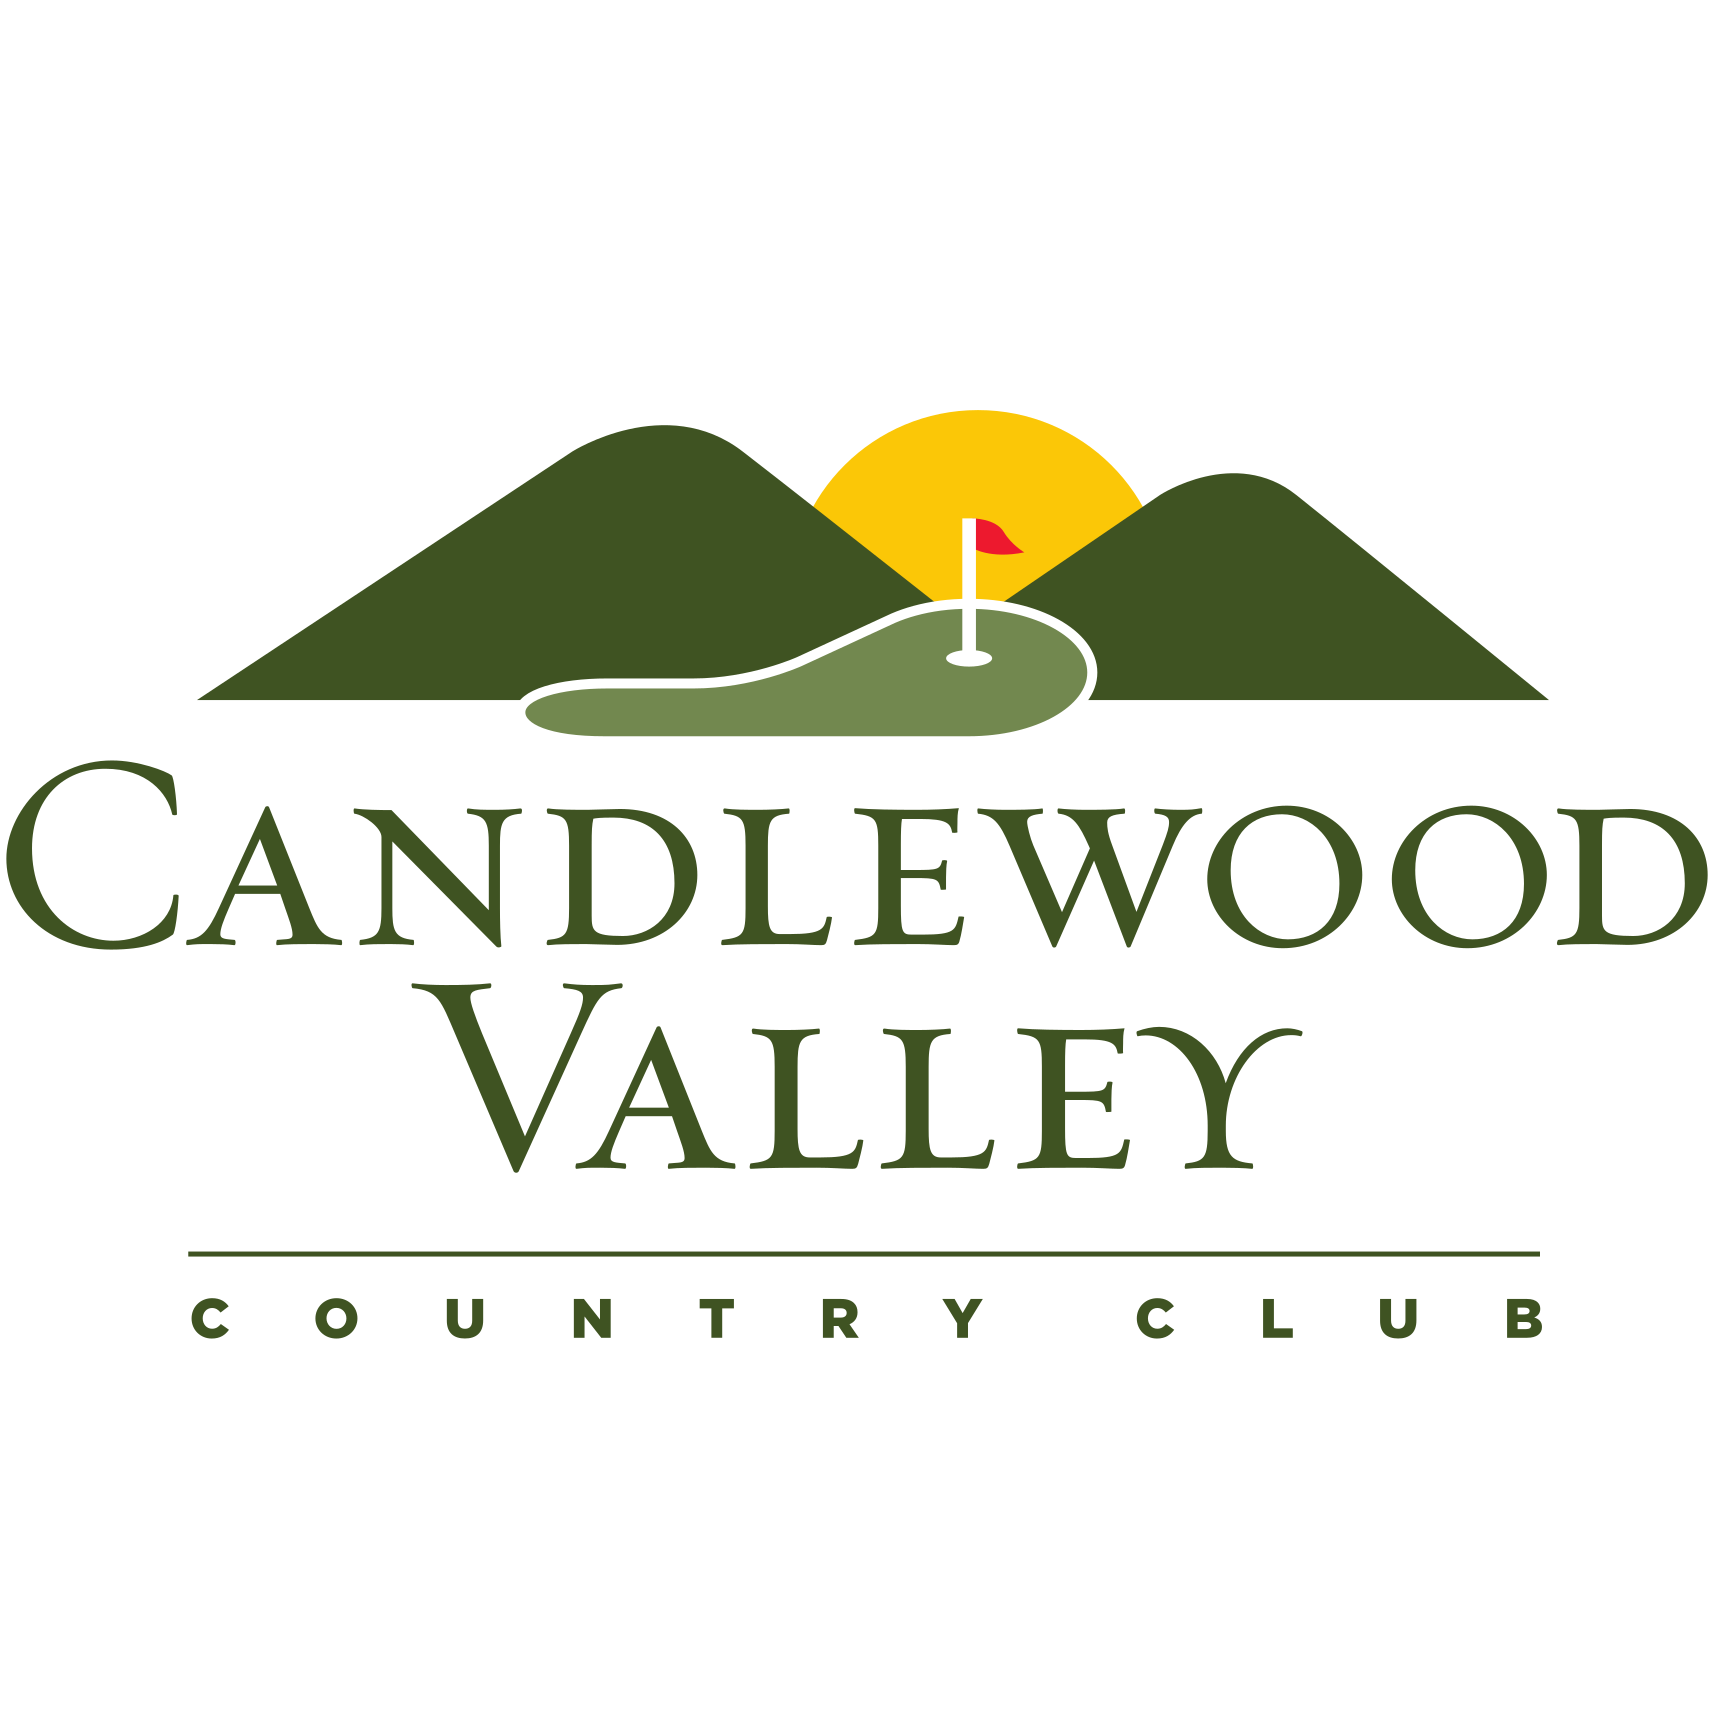 Candlewood Valley Country Club